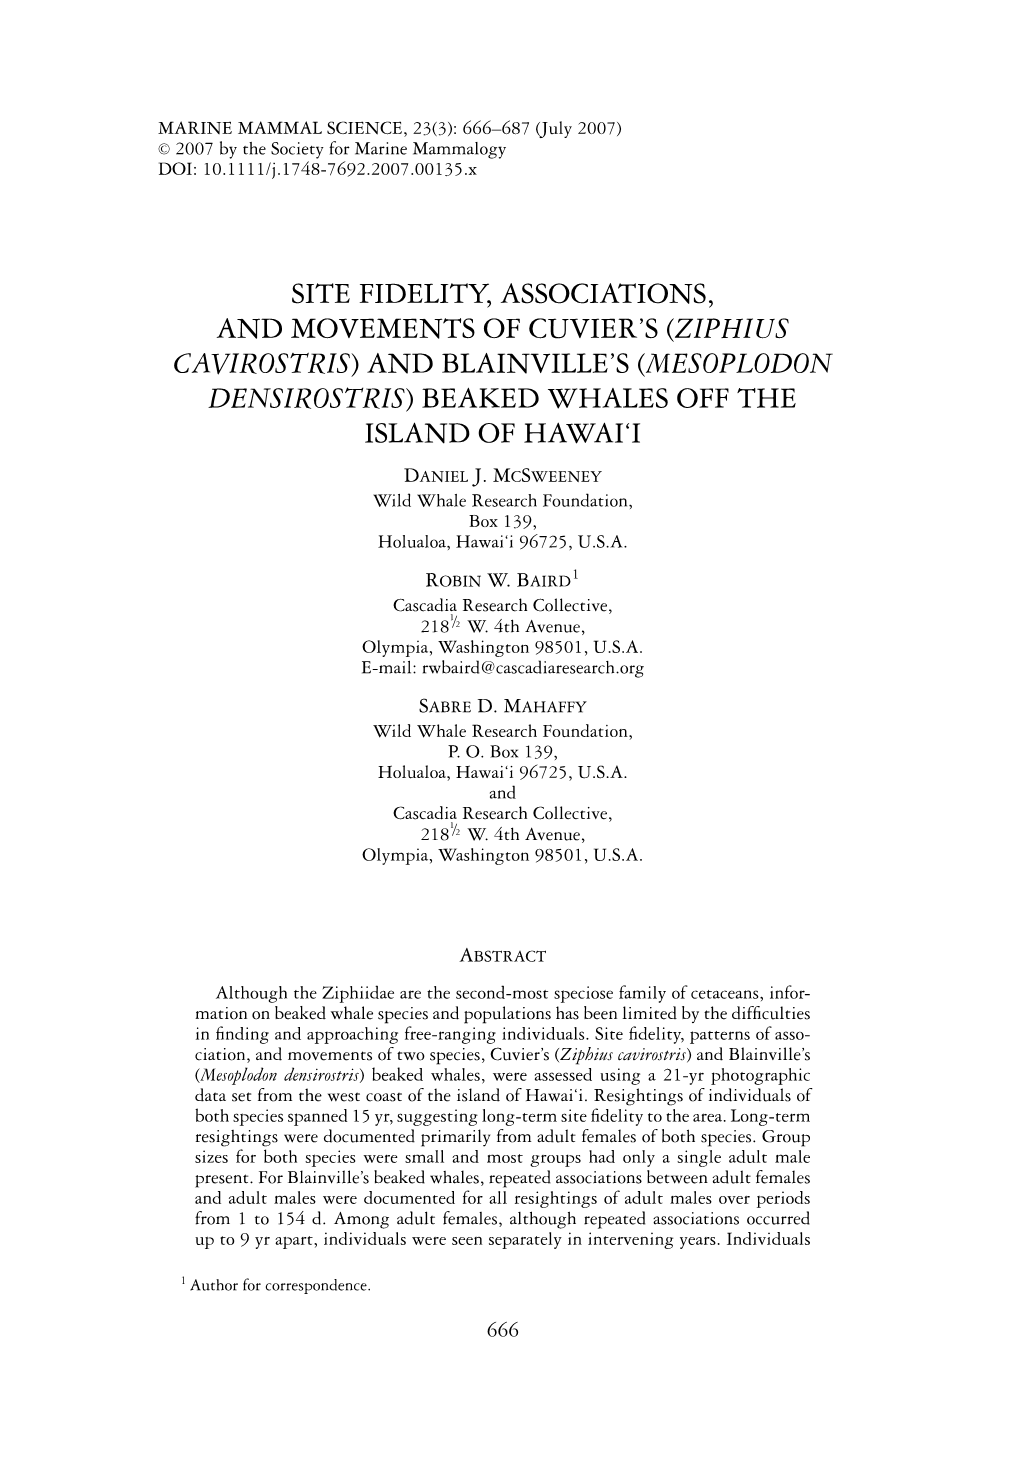 Site Fidelity, Associations, and Movements of Cuvier's